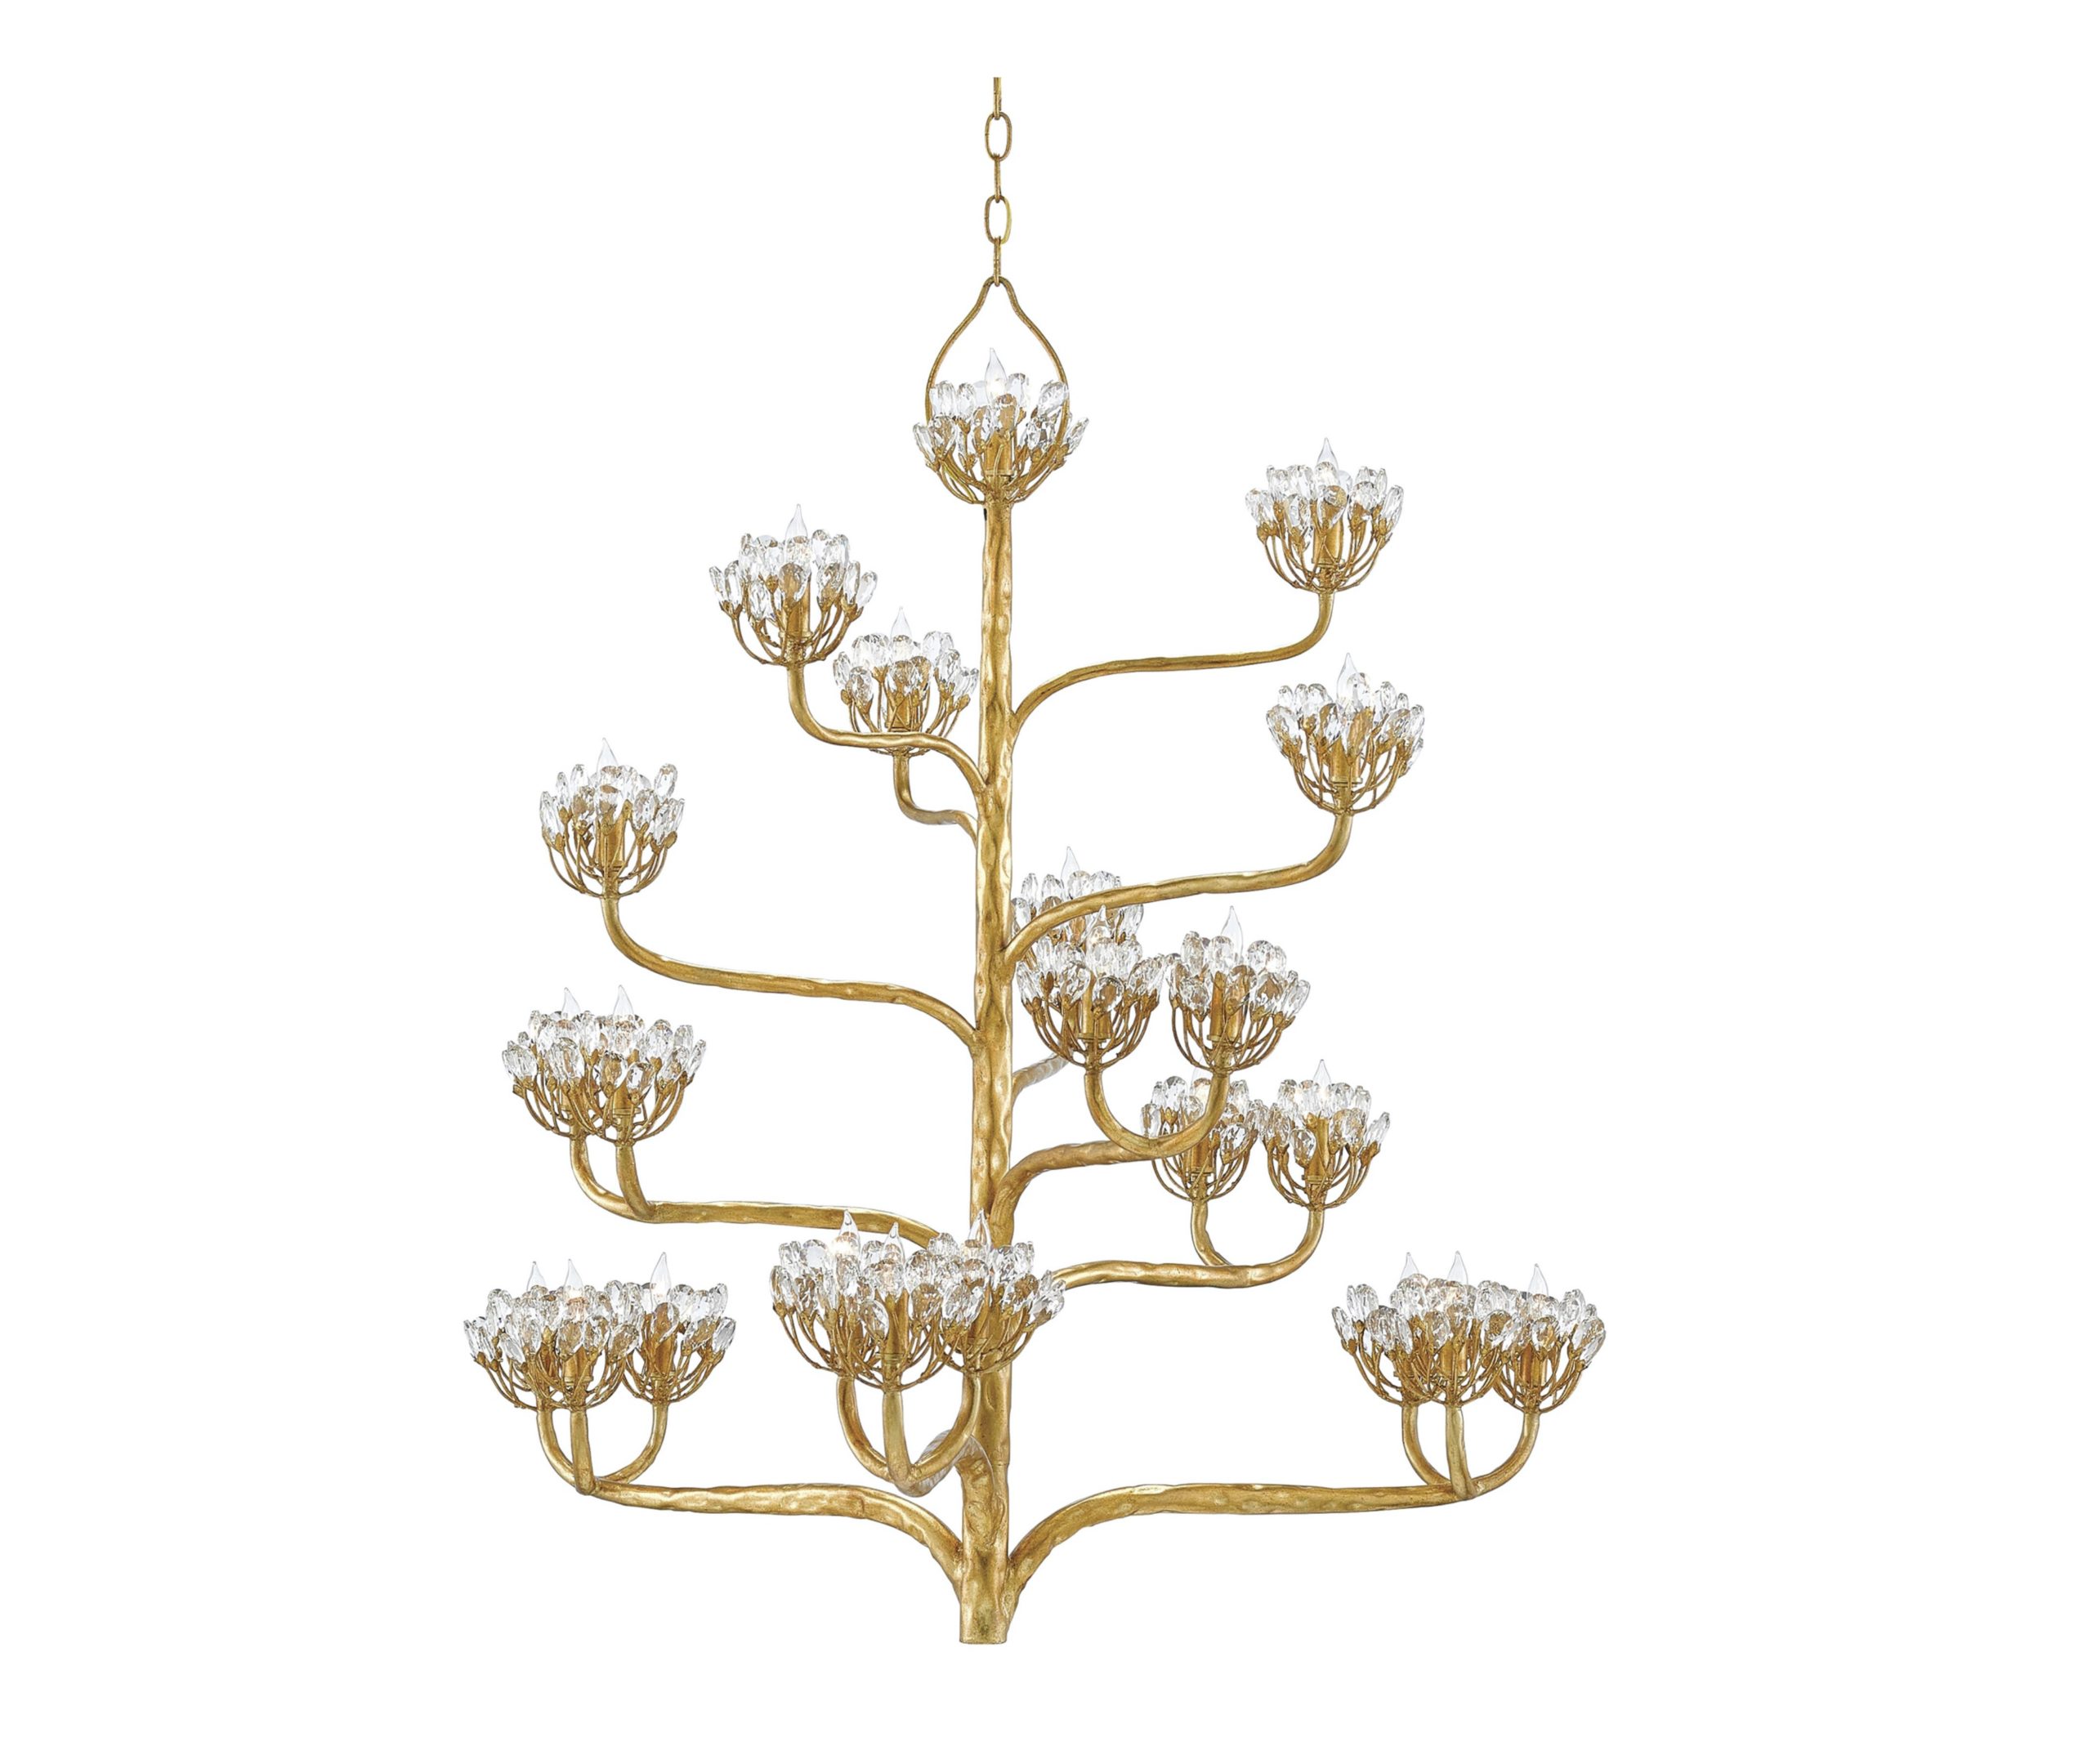 NYDC_WNWN_currey_and_co_products_agave_americana_gold_chandelier_9000-0157_